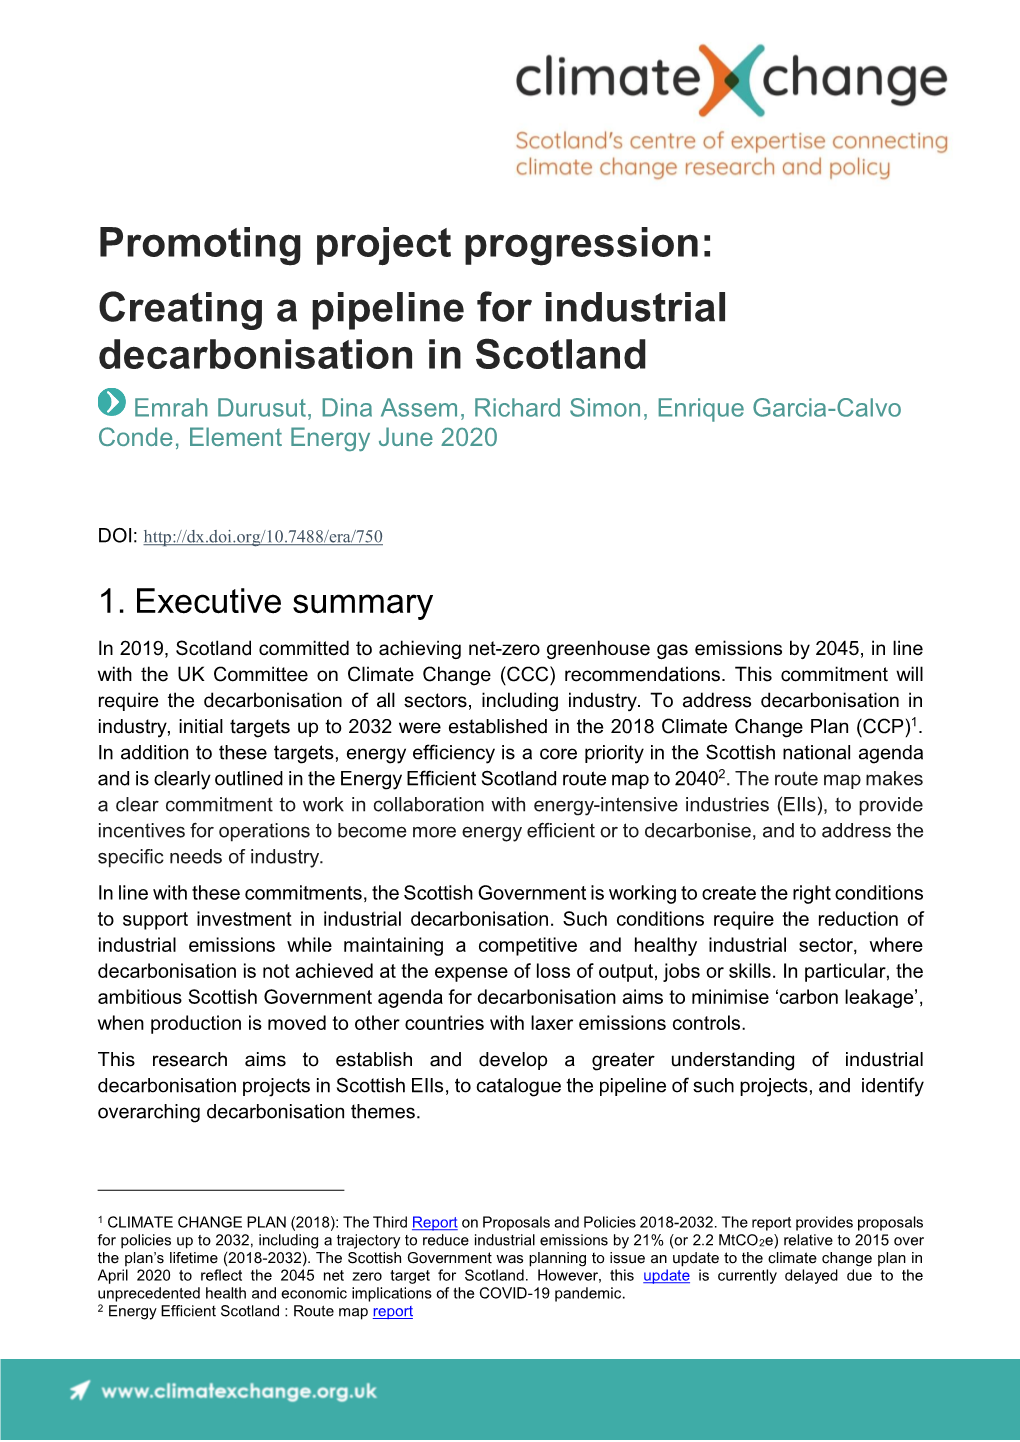 Promoting Project Progression: Creating a Pipeline for Industrial Decarbonisation in Scotland | I